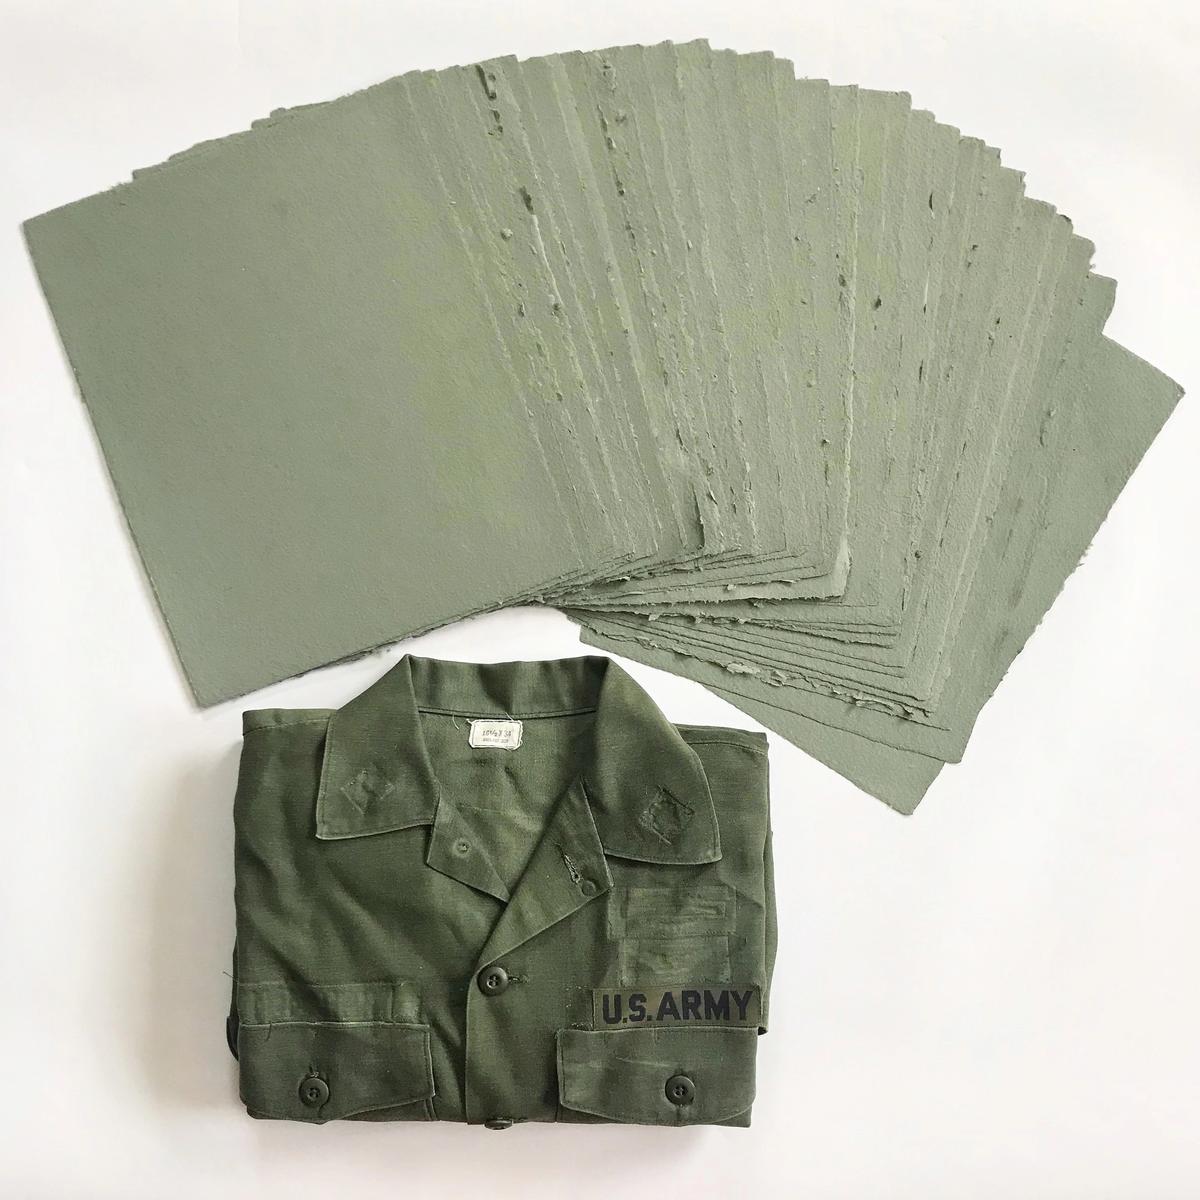 Combat Paper, a veteran-artisan collective led by Drew Cameron, transform donated military fatigues into paper for art making 